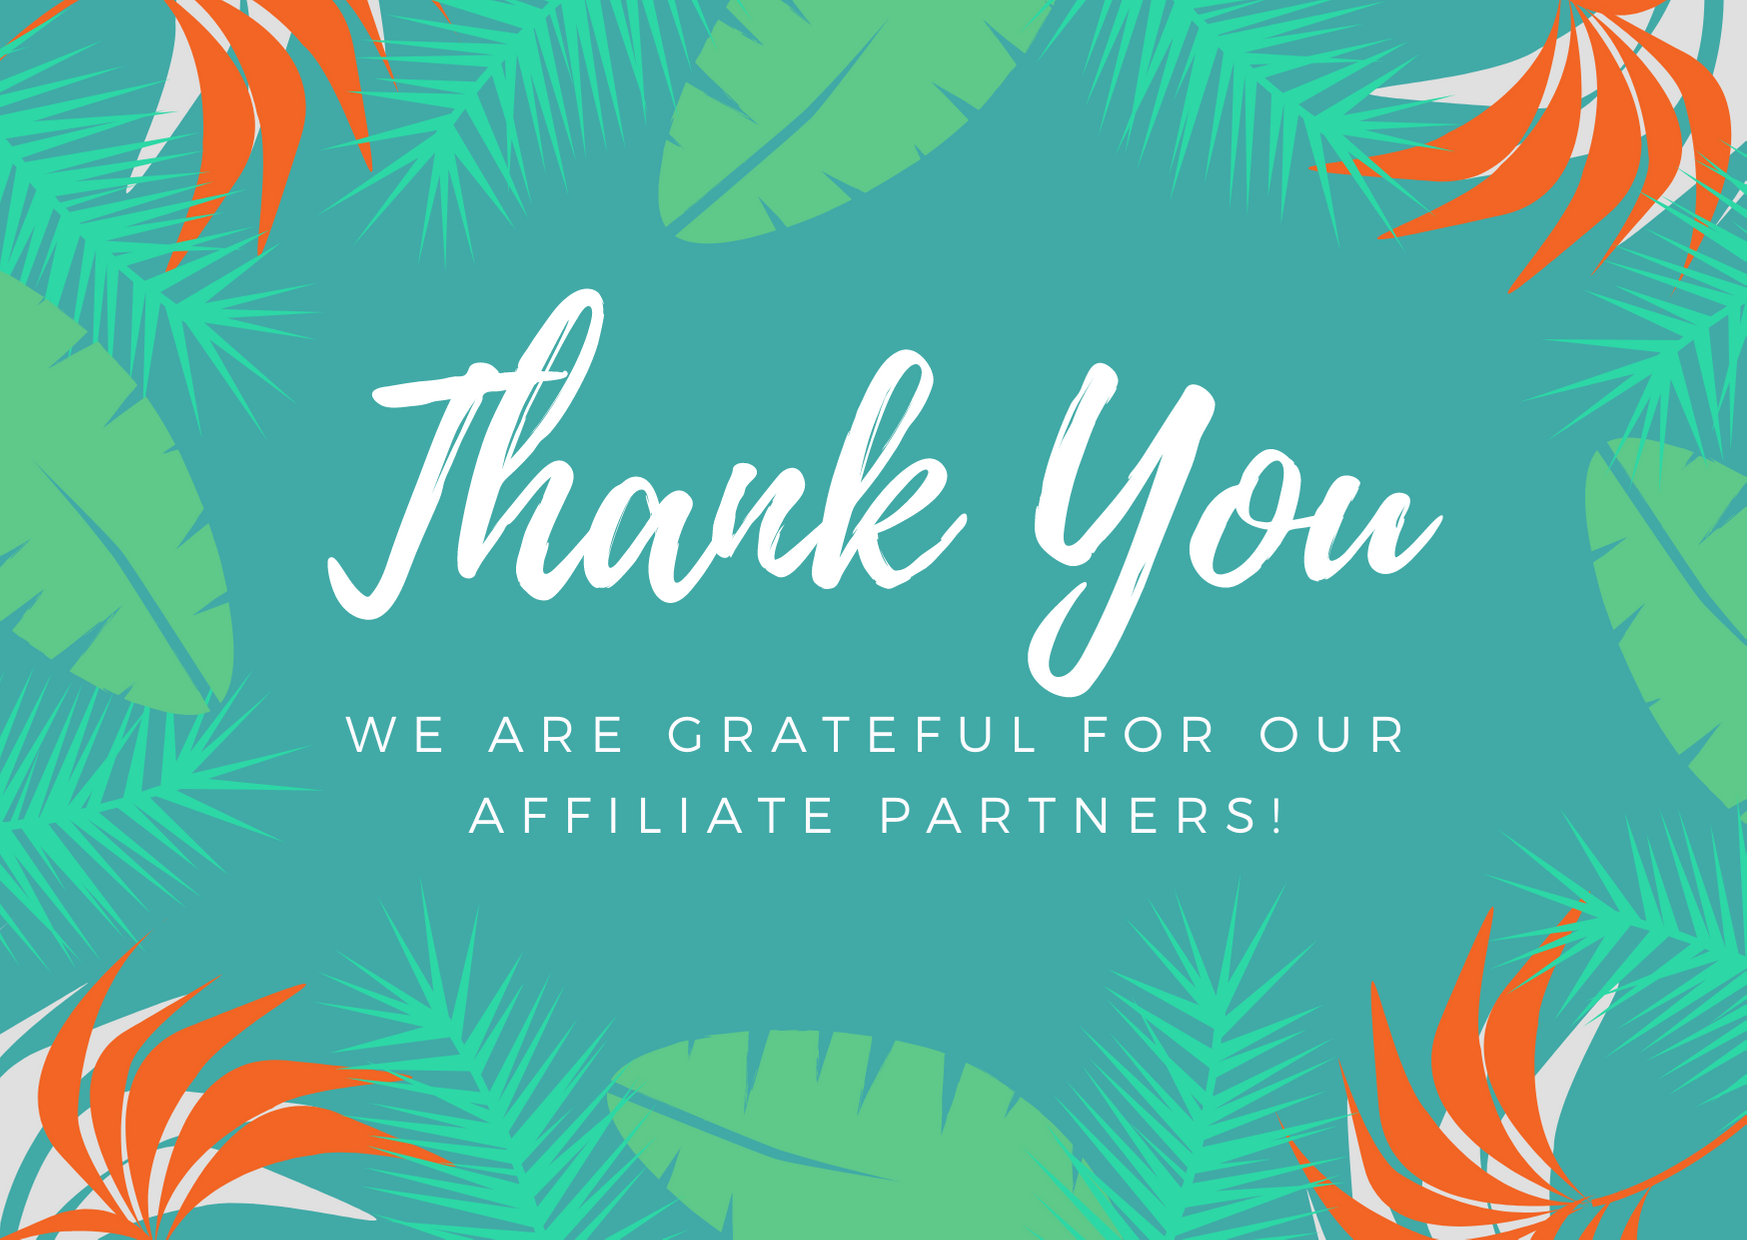 THANK YOU TO OUR AFFILIATE PARTNERS!